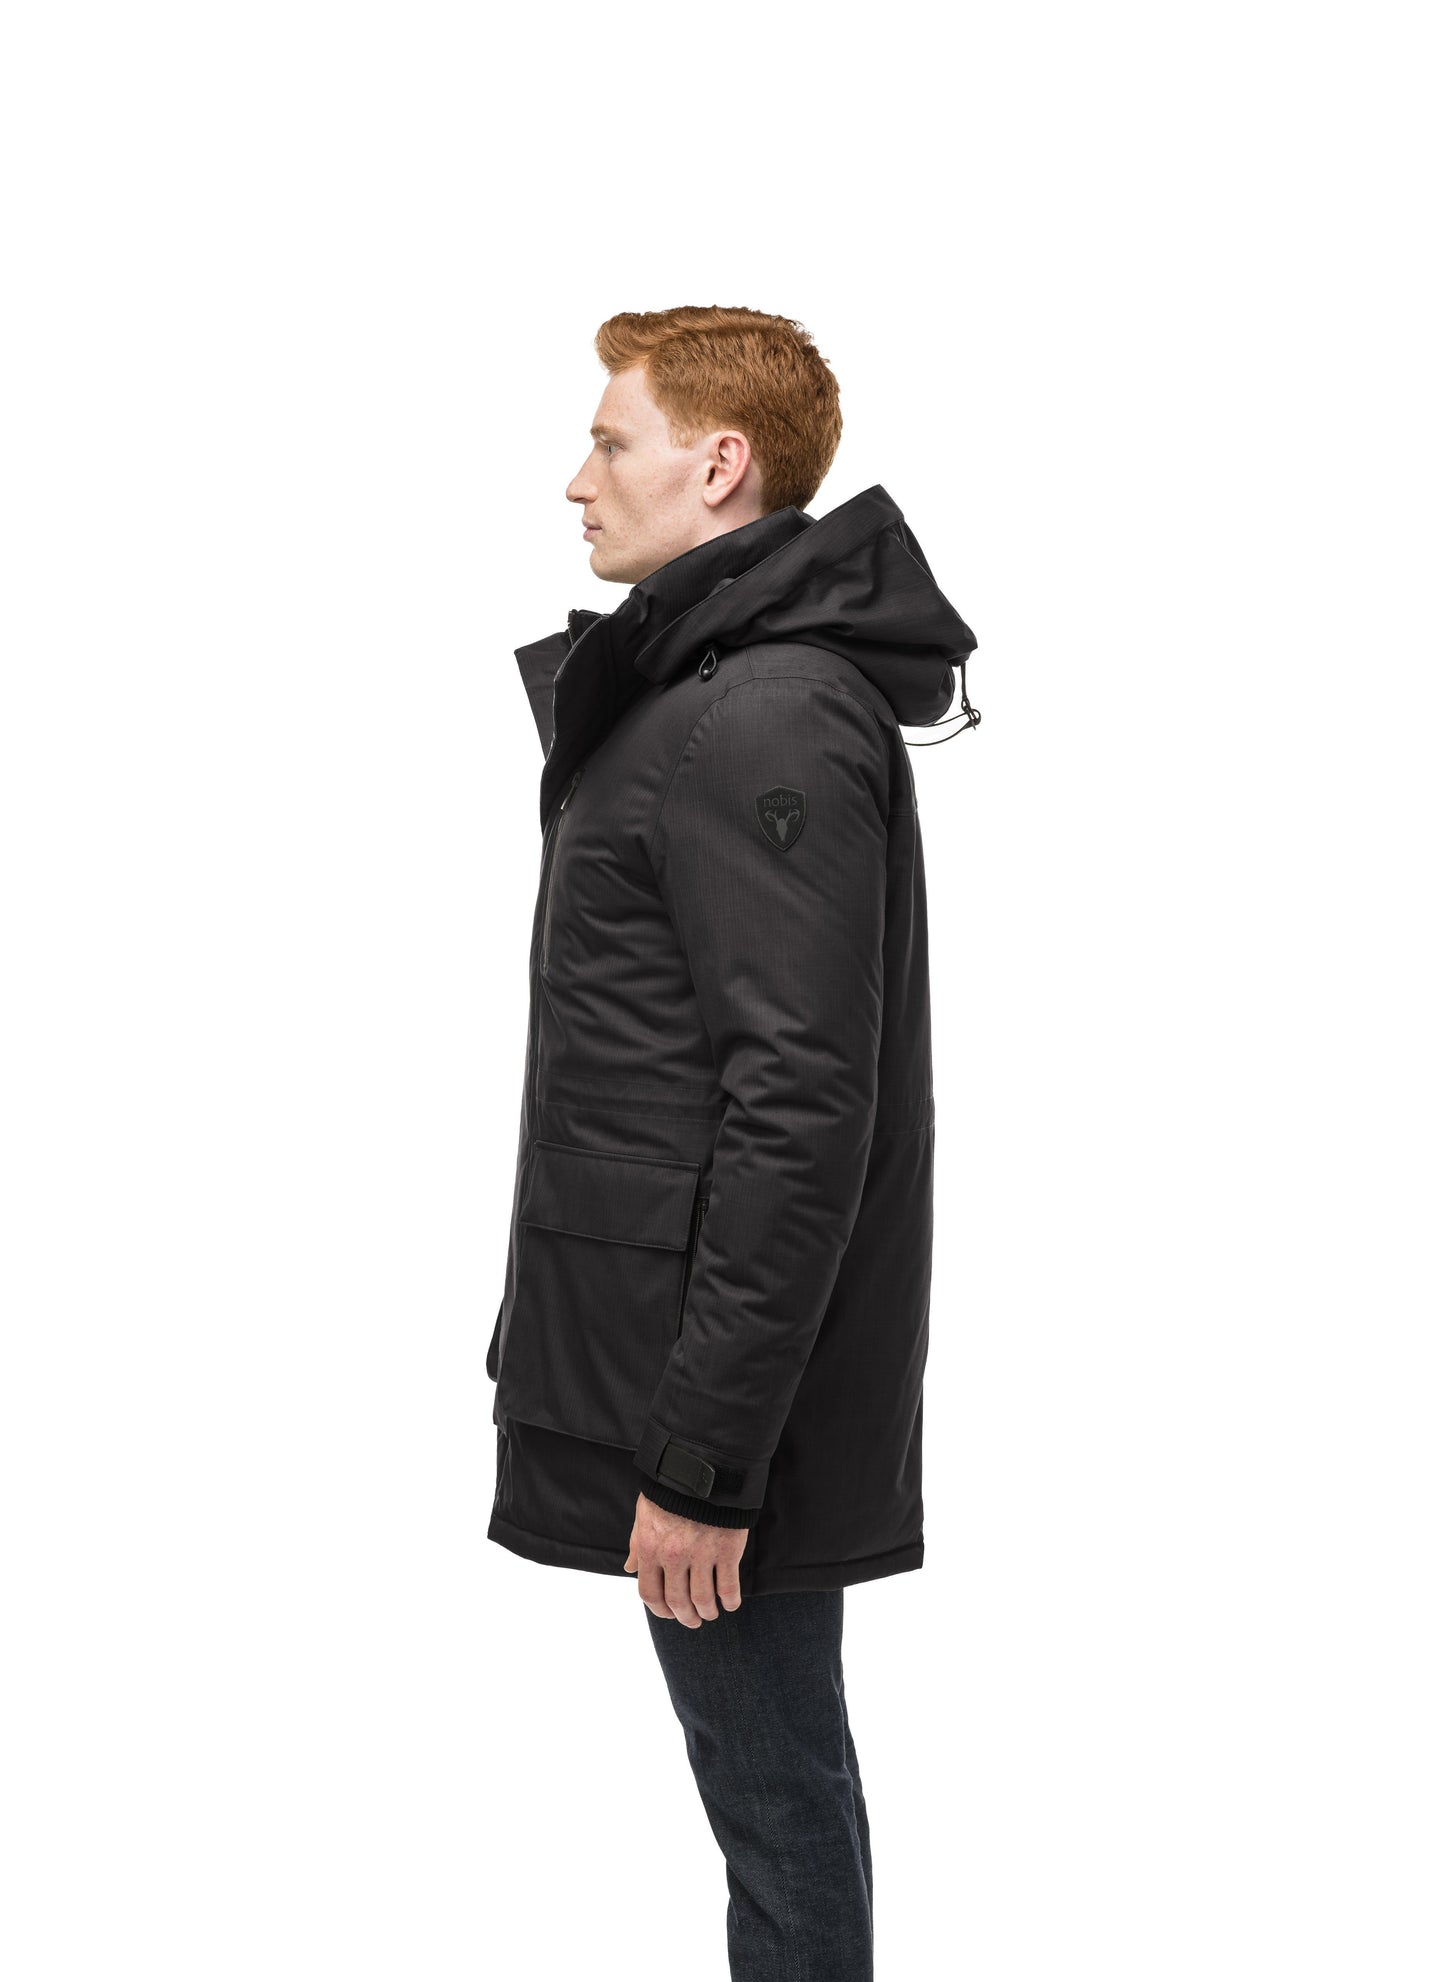 Mid weight men's down filled parka with two patch pockets at the hip and snap closure side vents in Black